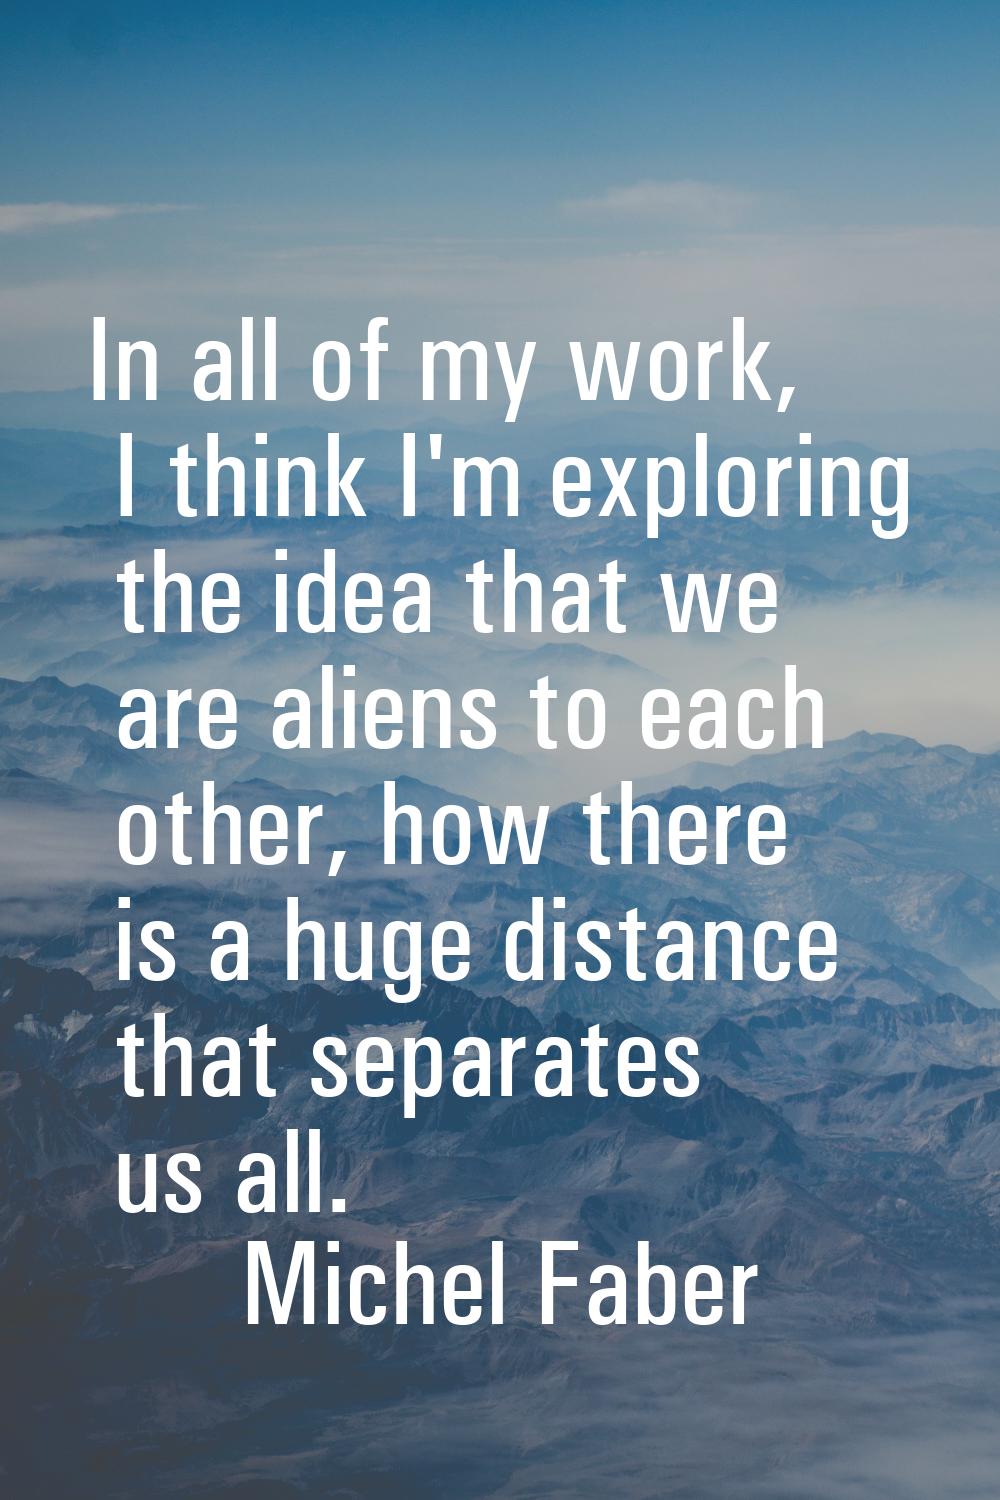 In all of my work, I think I'm exploring the idea that we are aliens to each other, how there is a 